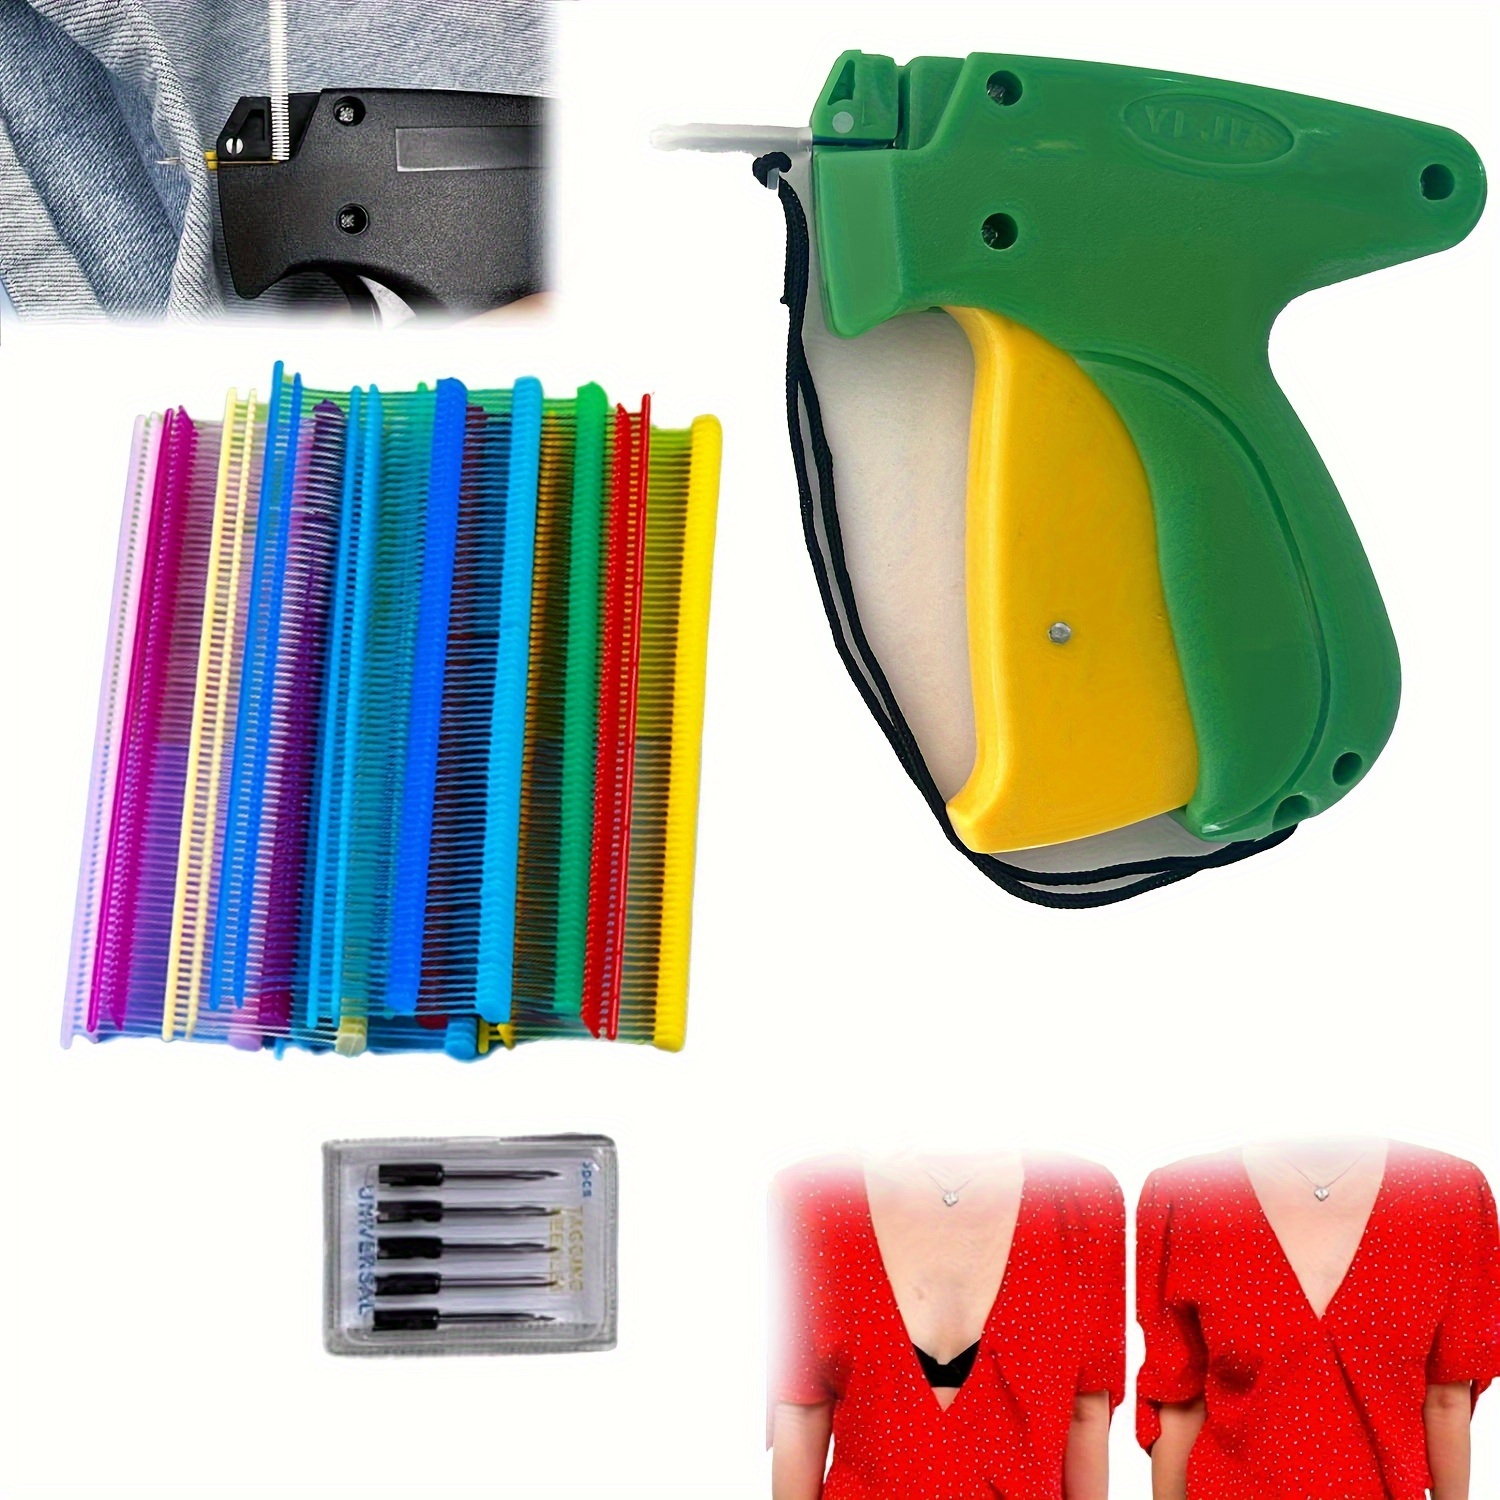 

Renaissance-inspired Casual Clothing Tag Gun - Durable Plastic, Perfect For Apparel & Accessories